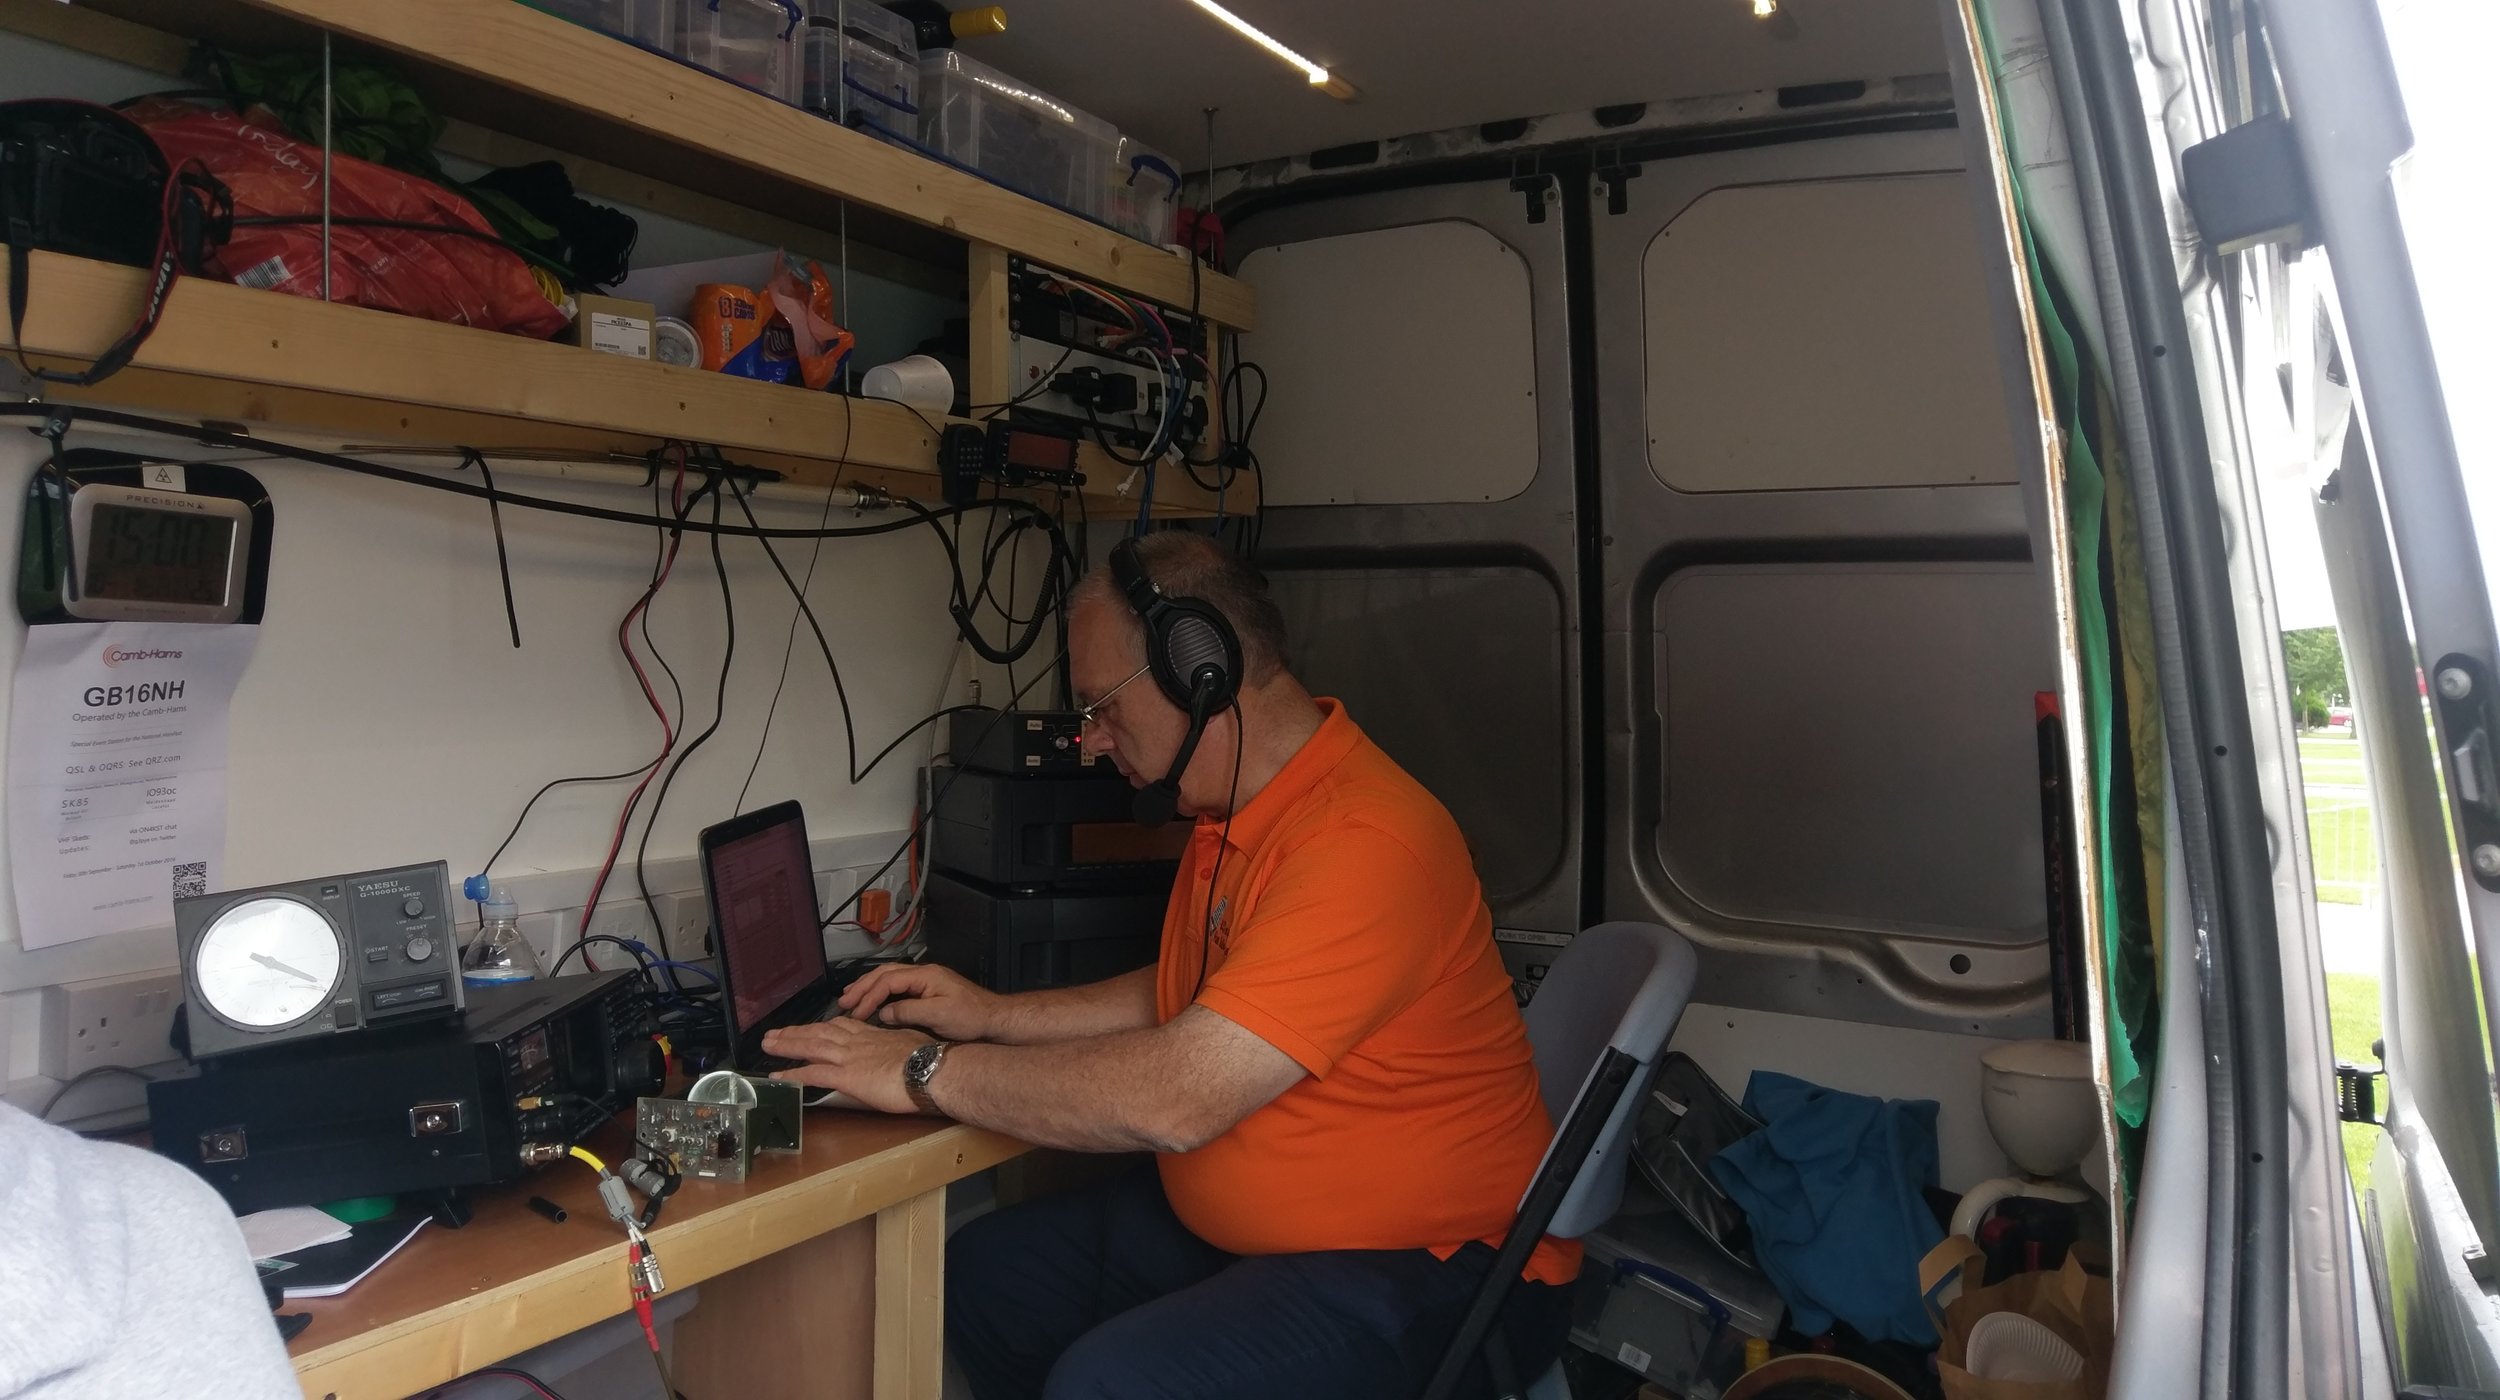  Martin Butler (M1MRB / W9ICQ) works on the Camb-Hams Flossie2 special event station - GB16NH 